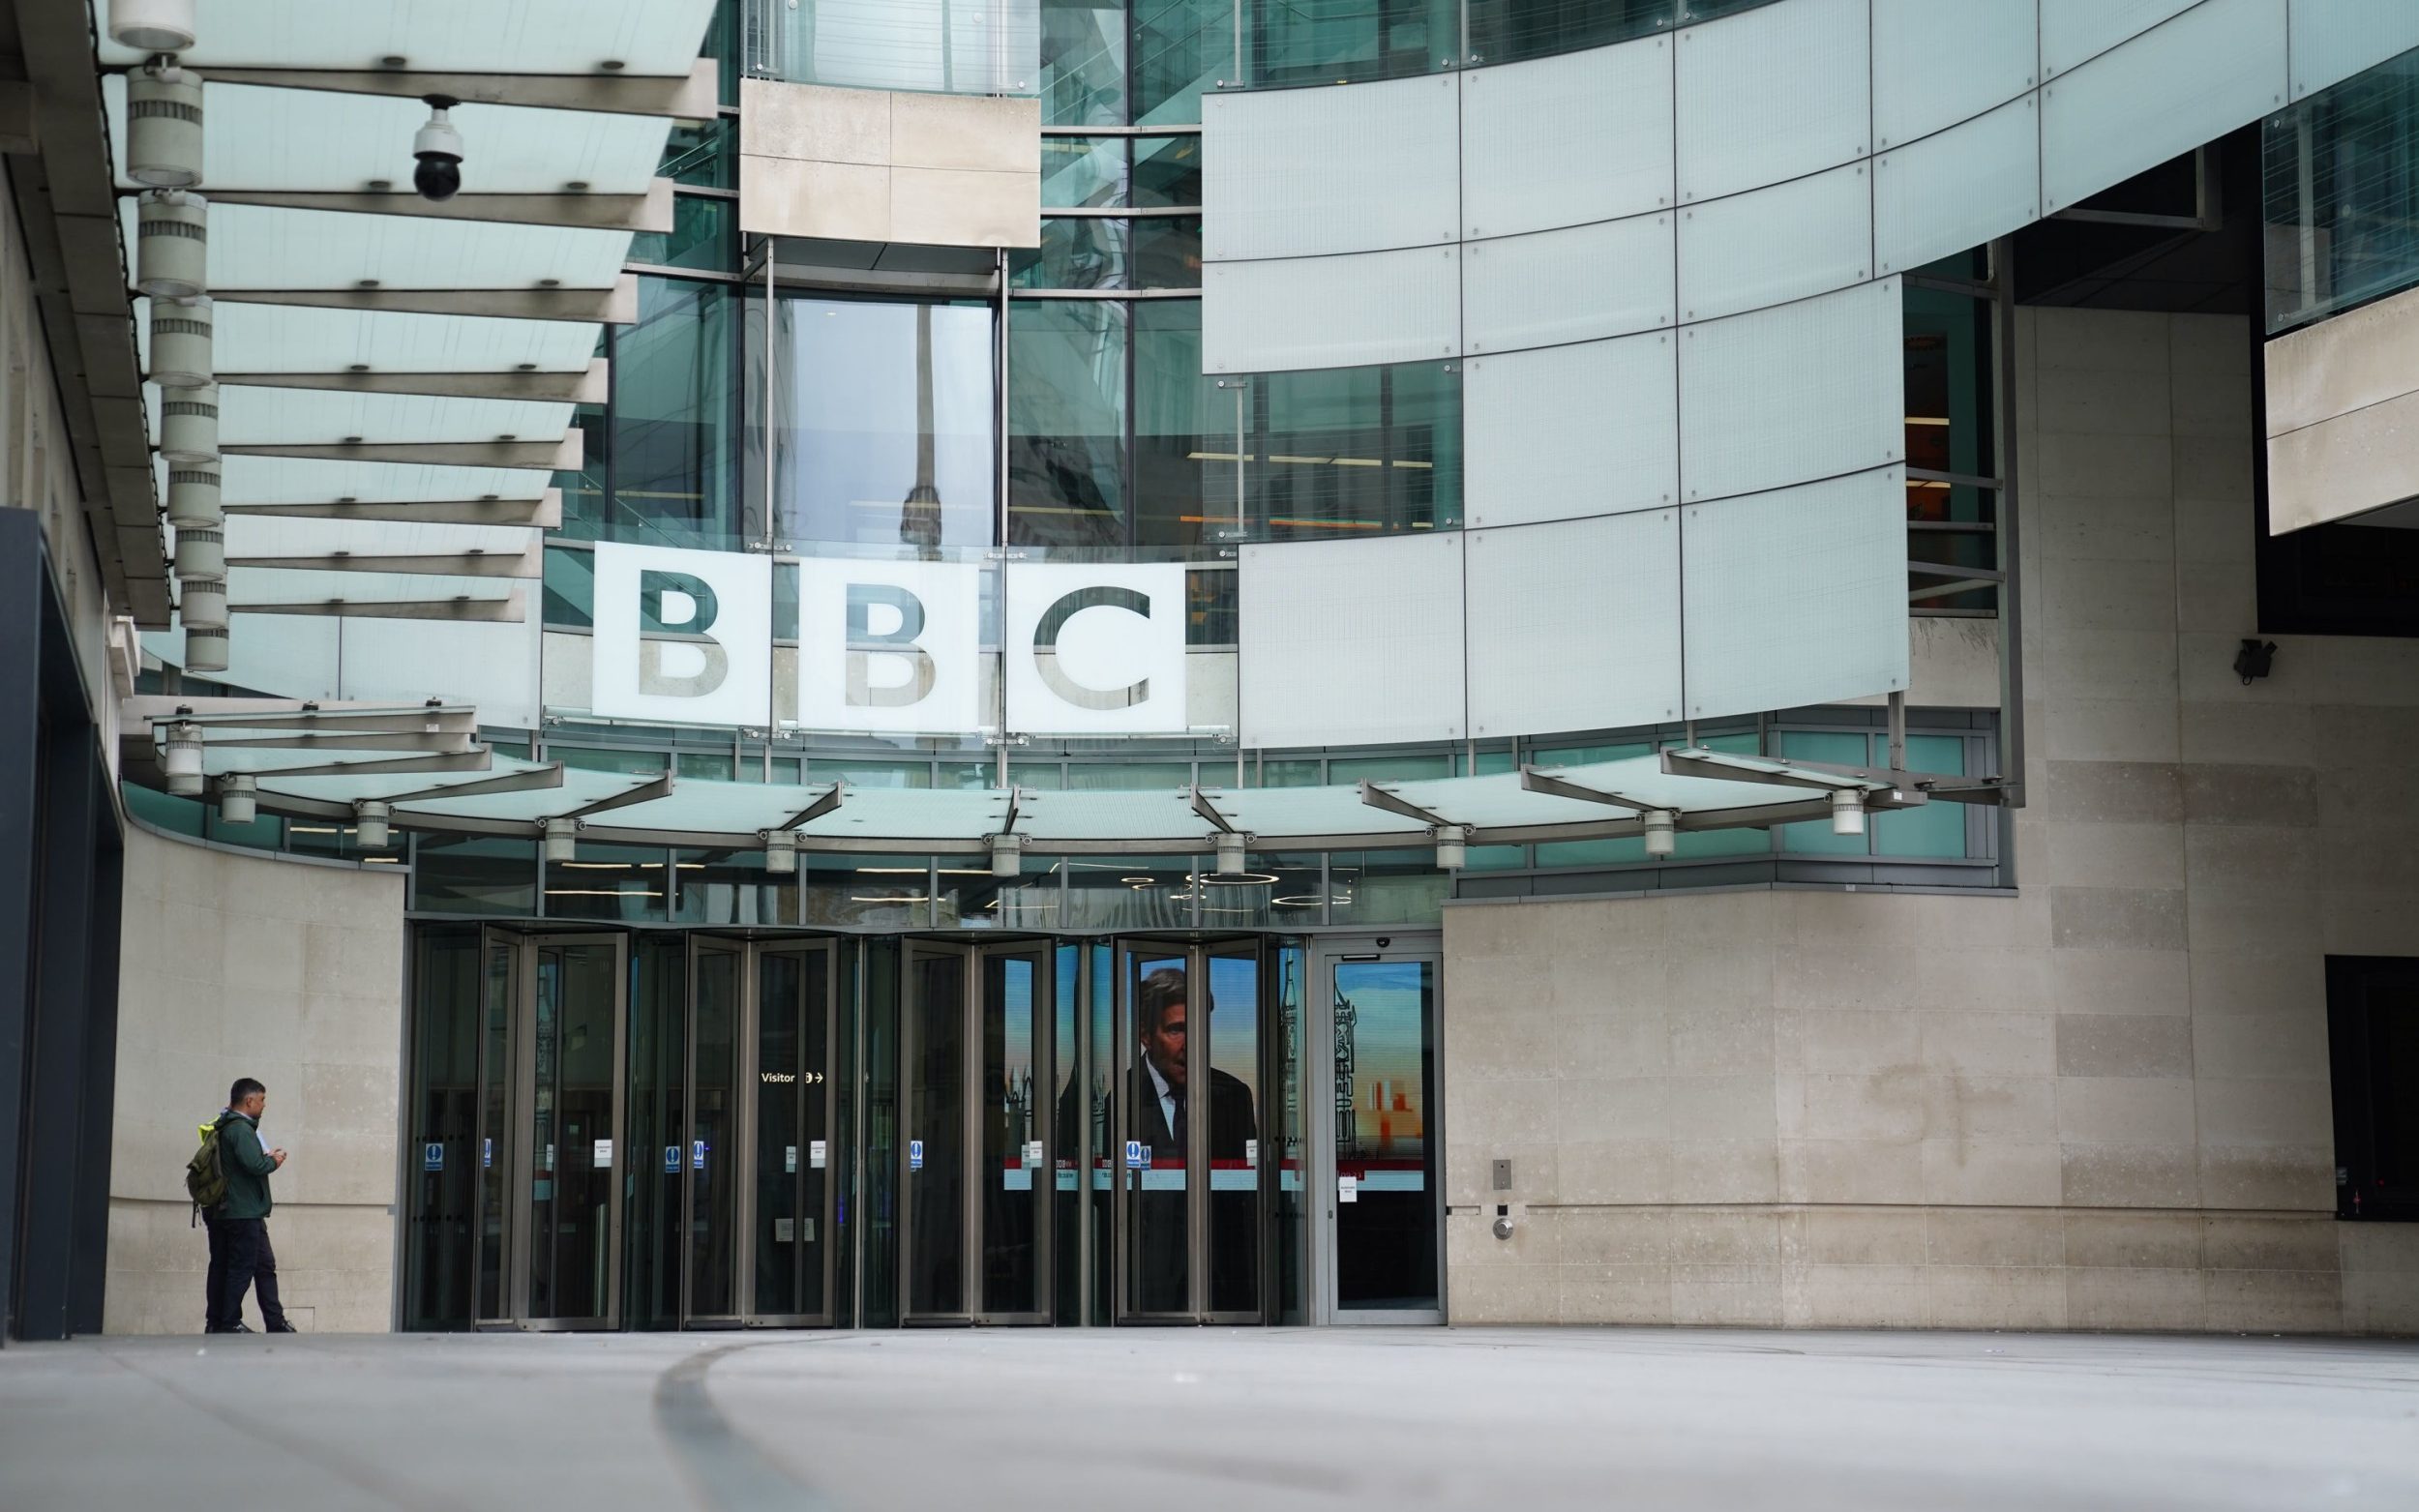 BBC calls in police over presenter accused of paying teenager for explicit images